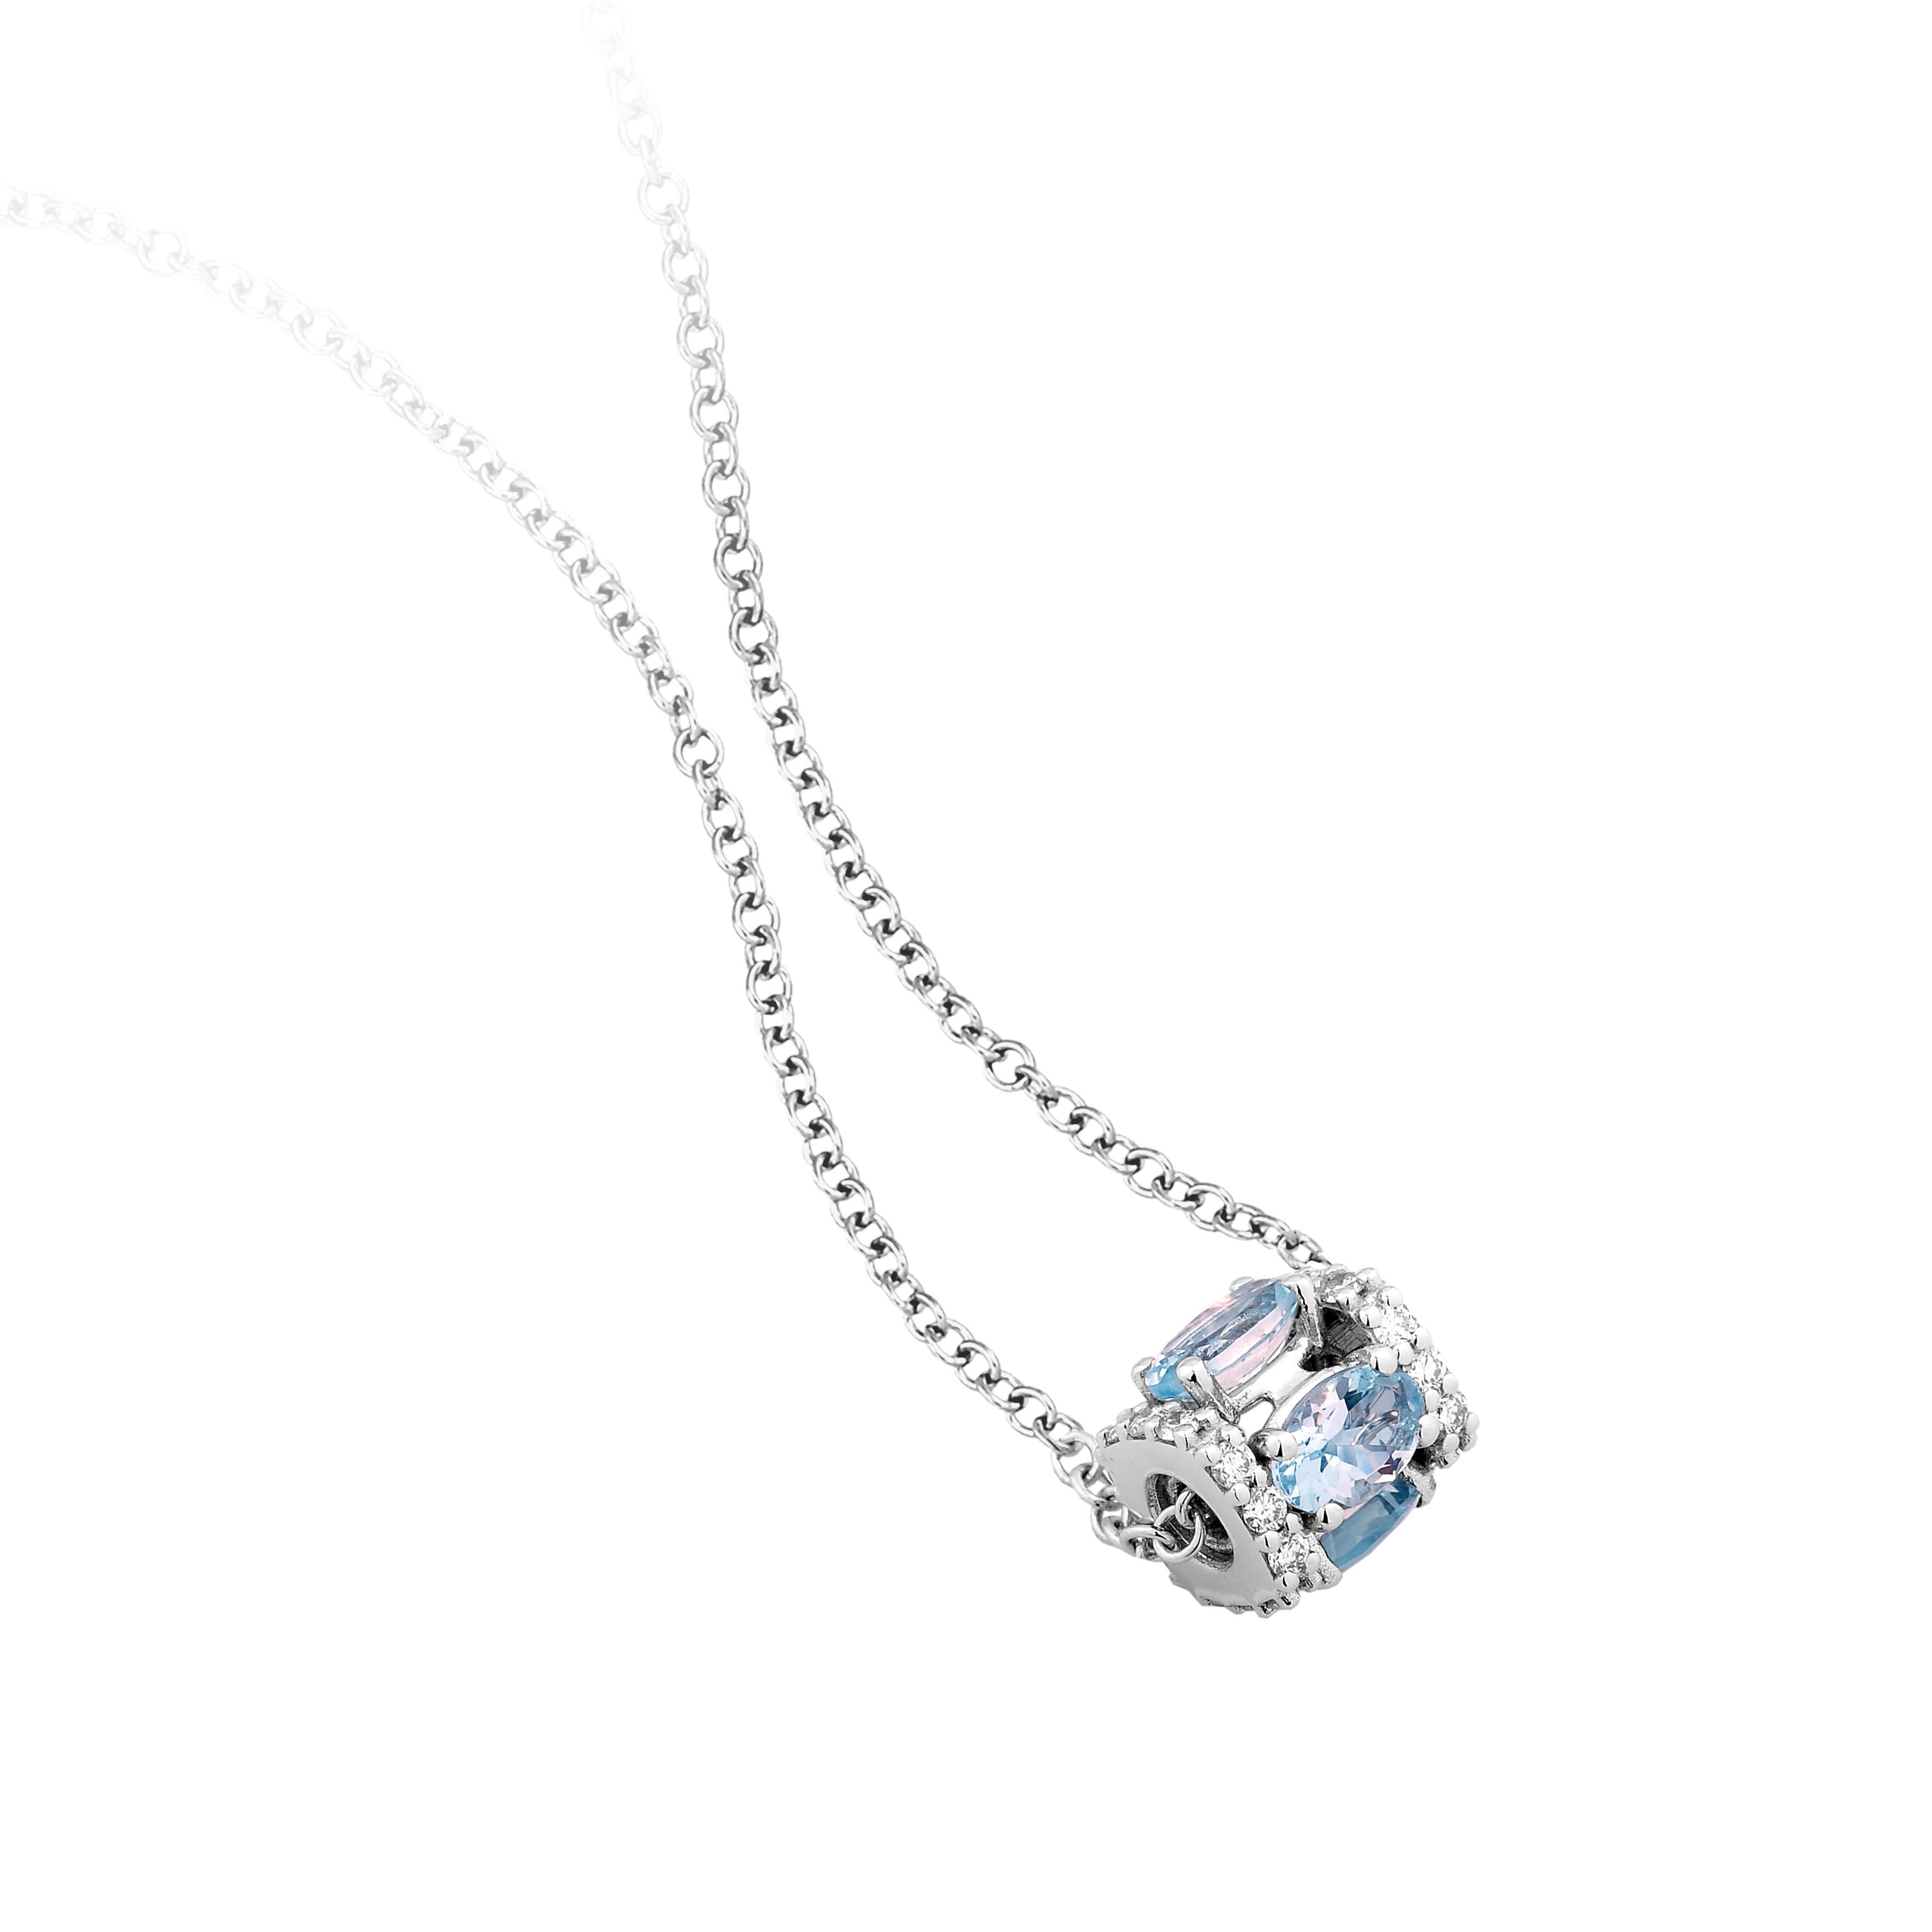 18K white gold, white diamond (approx. 0.40 carats), and aquamarine (approx. 1.86 carats) pendant 